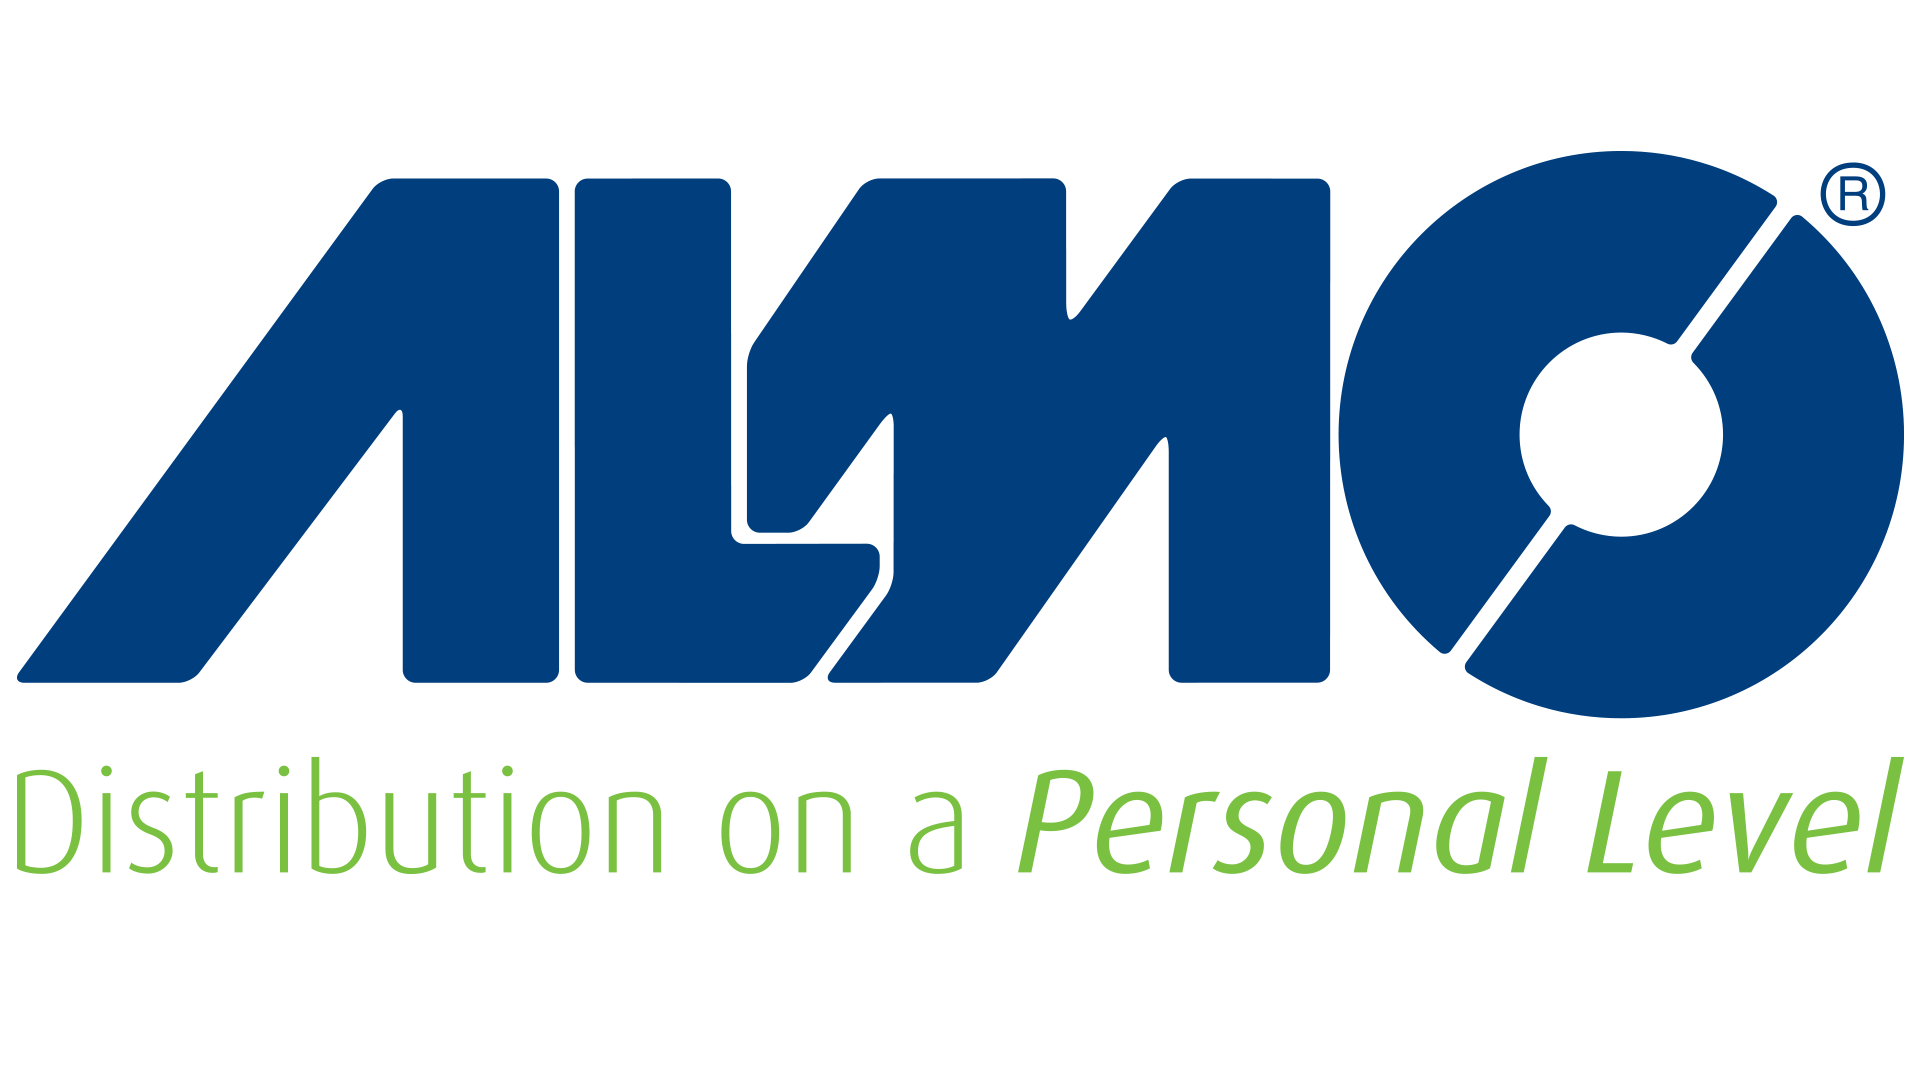 AtlasIED is an official sponsor of Almo Distribution on a Personal Level